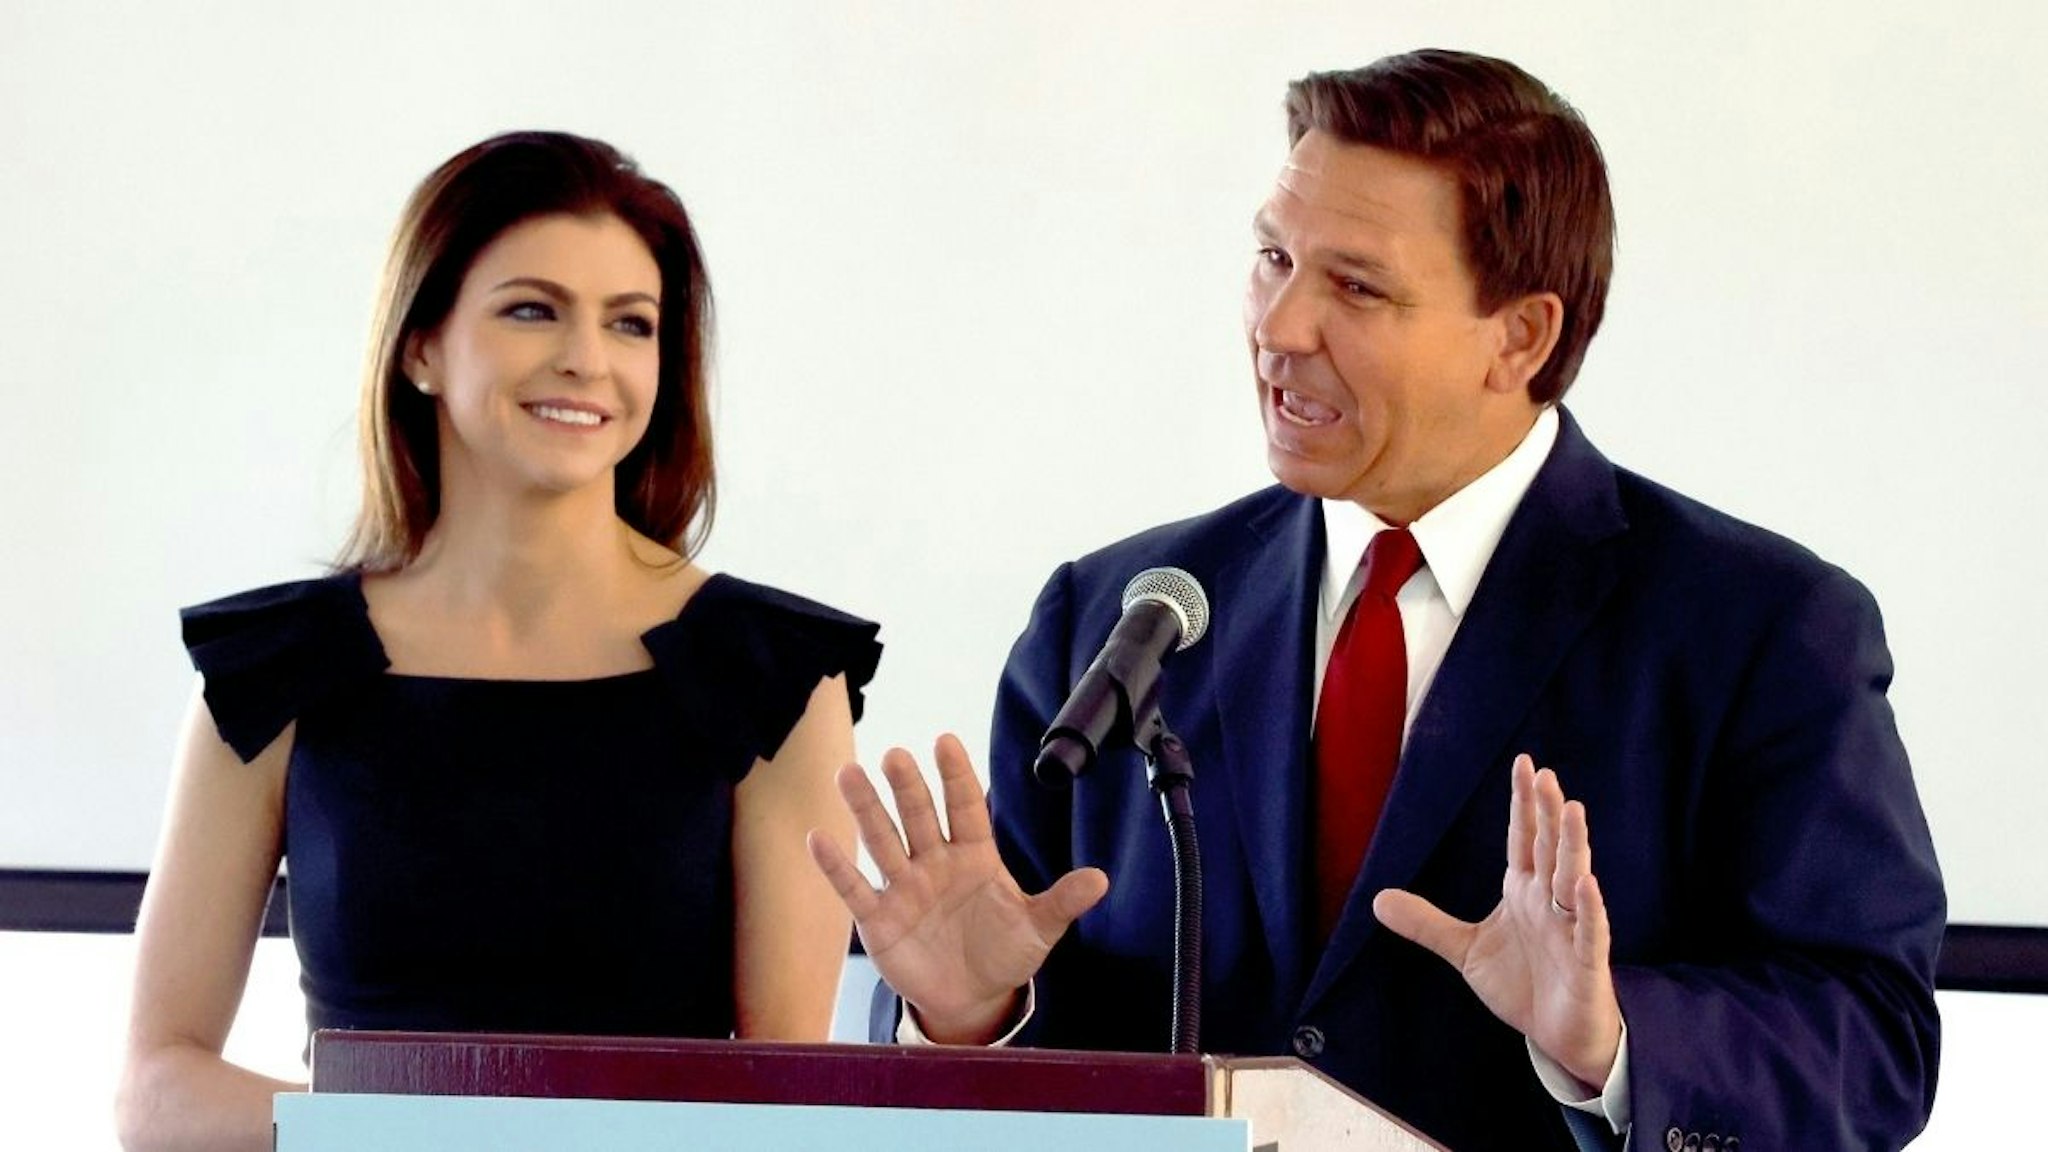 Florida Gov. Ron DeSantis introduces Florida first lady Casey DeSantis during a news conference announcing the Resiliency Florida initiative, at the Amway Center in Orlando, Friday, Feb. 26, 2021.